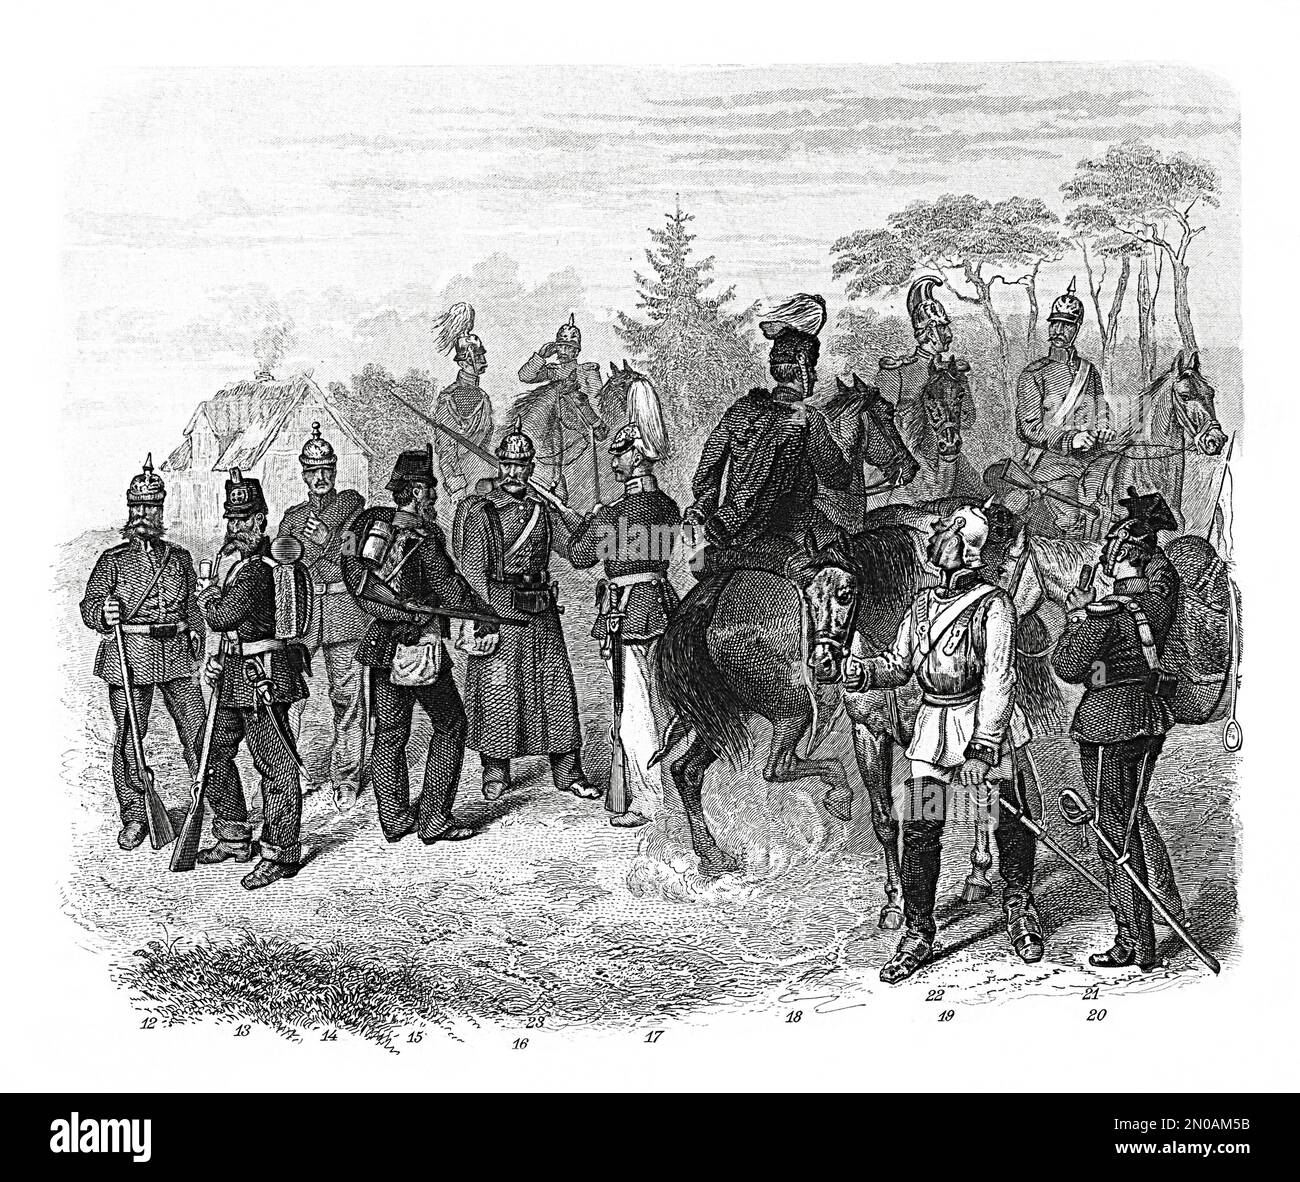 19th-century engraving depicting German military unit in XIX century: 12,13. Landwehr; 14. Cannoneer; 15,16. Infantry soldier; 17. Guardsman; 18. Huss Stock Photo